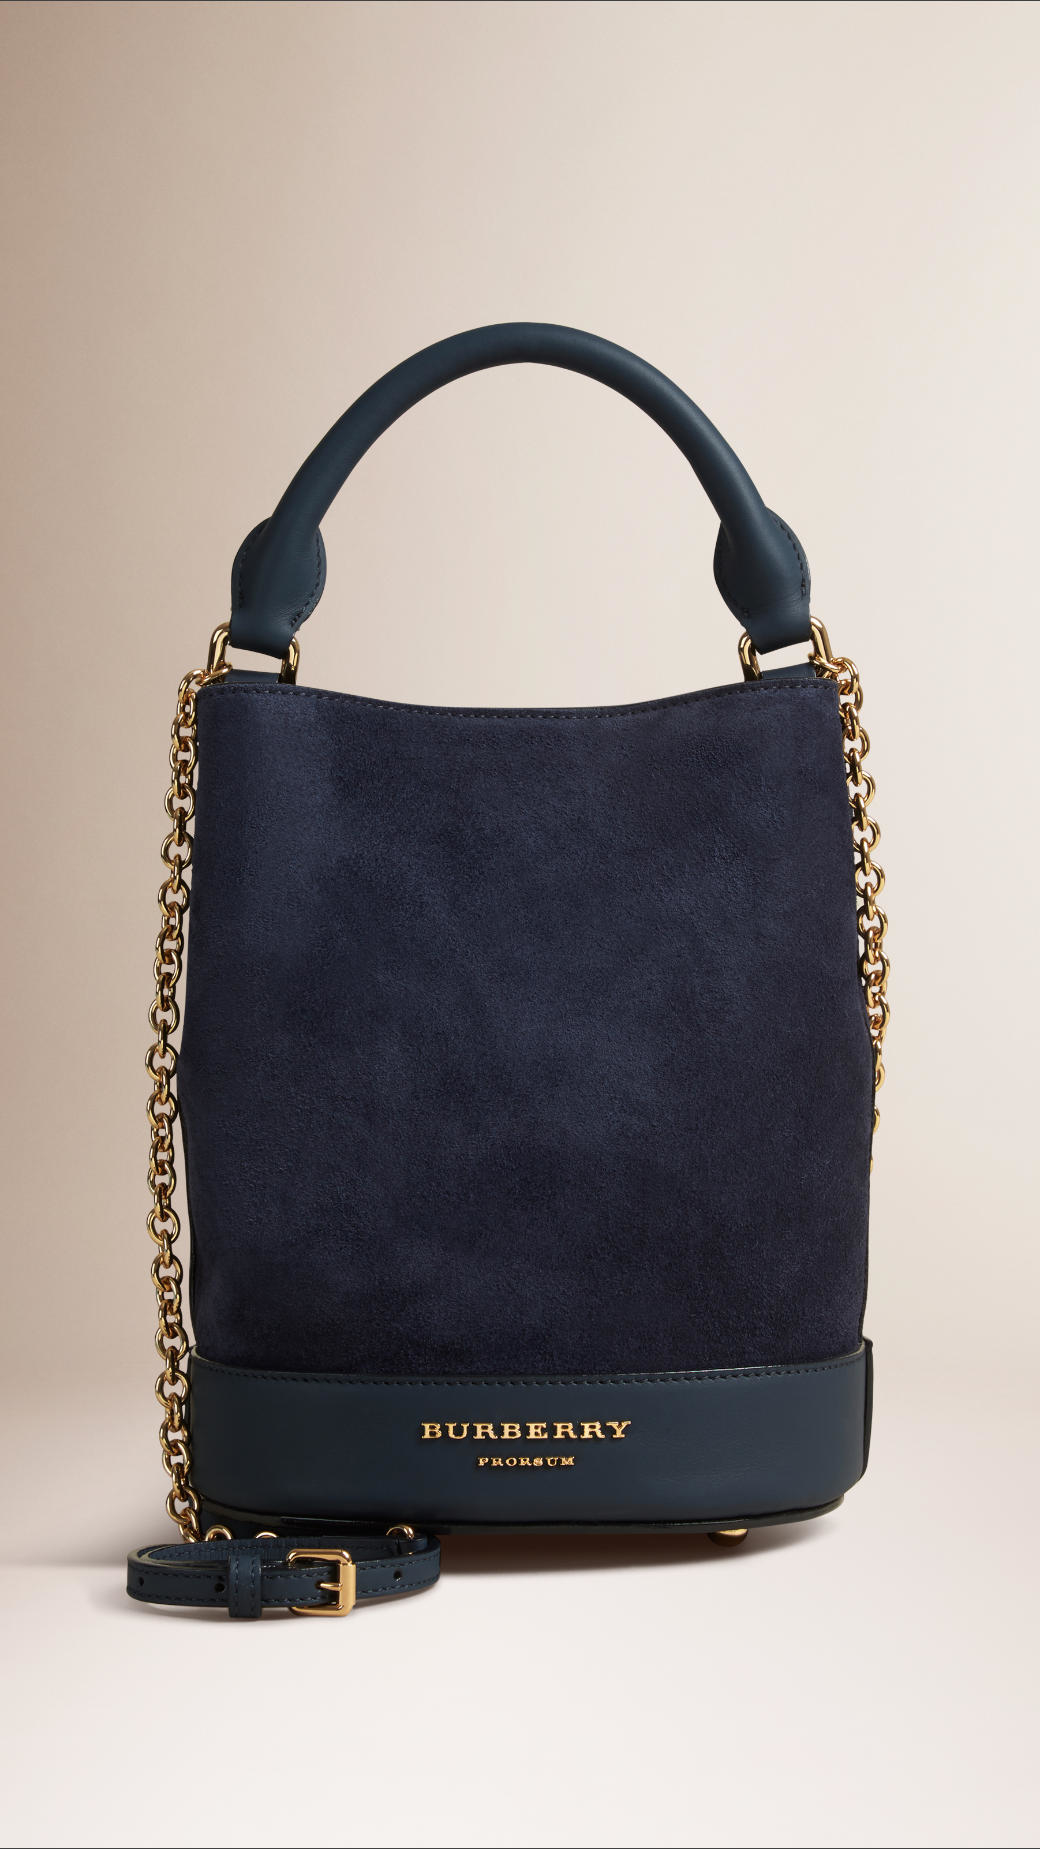 Lyst - Burberry Small Suede Bucket Bag in Blue